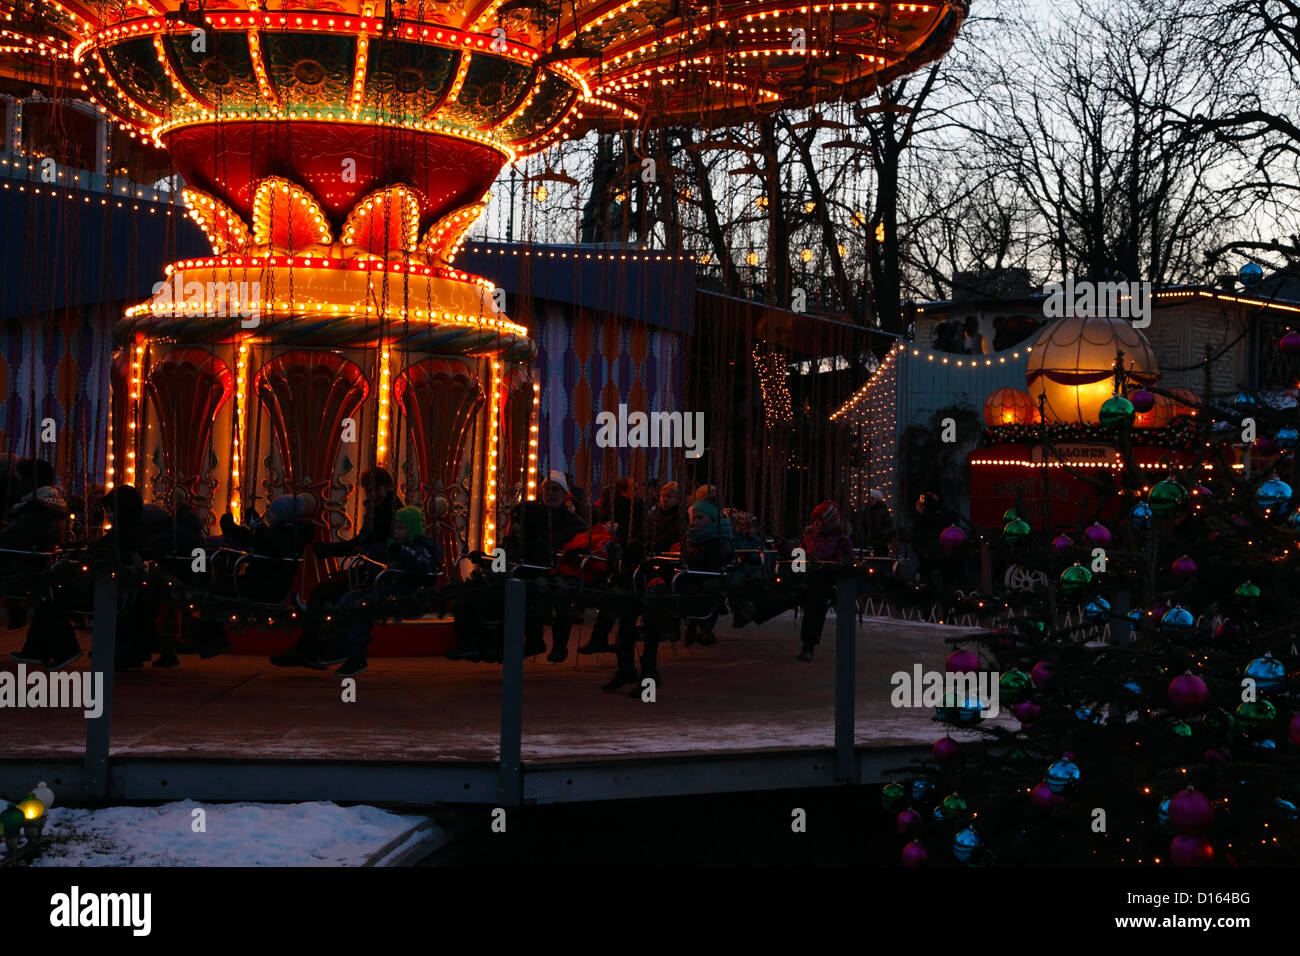 The Swing Carousel, Christmas trees and decorations at dusk at  Christmas market in the snow covered Tivoli Gardens, Copenhagen, Denmark Stock Photo